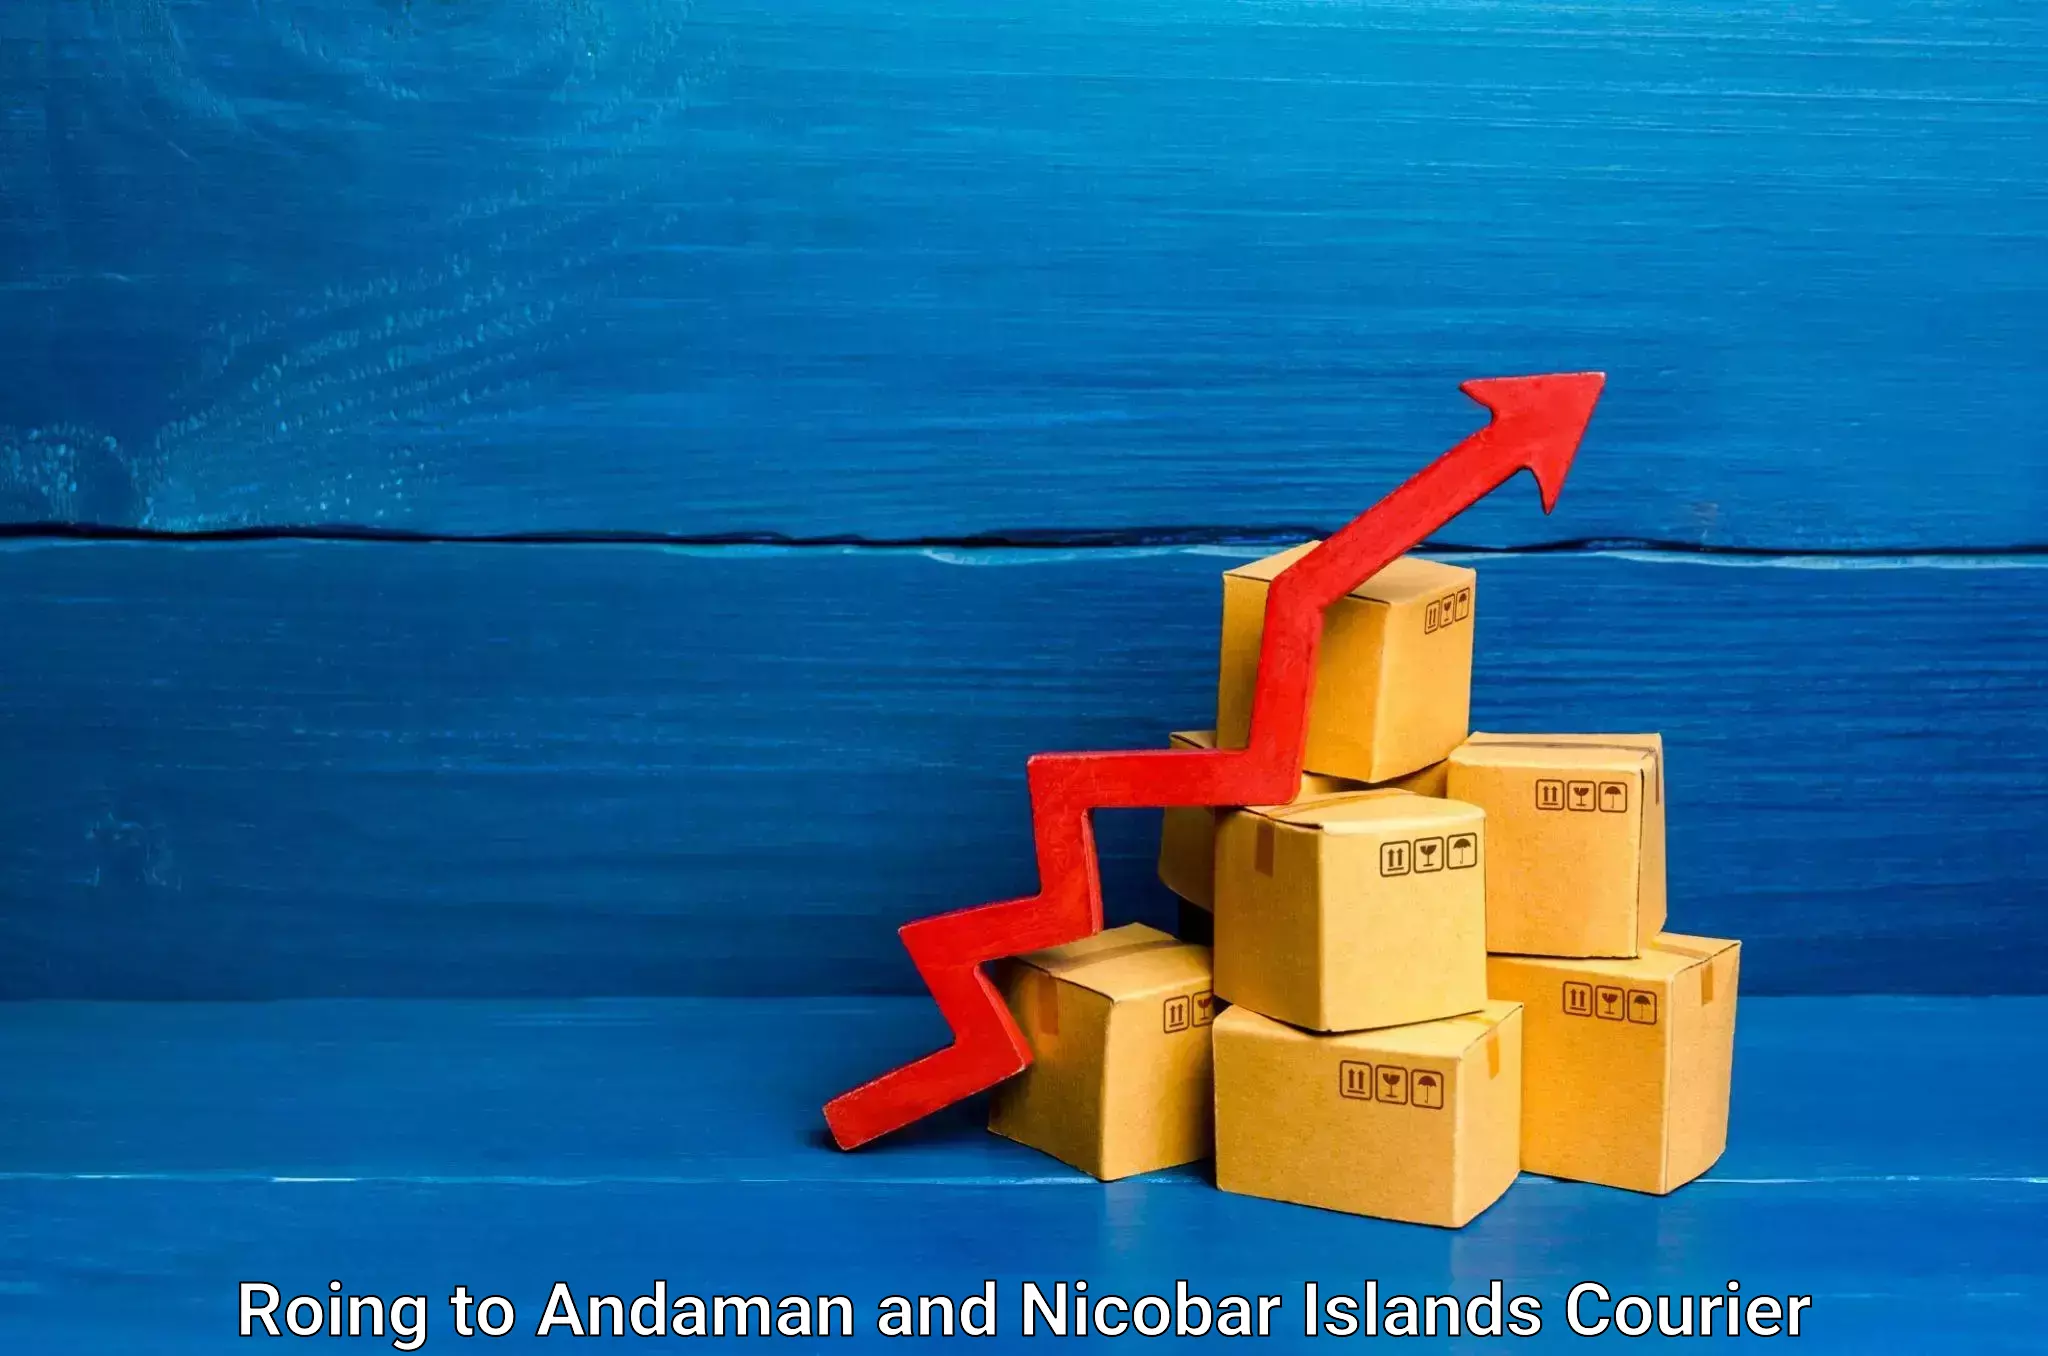 Bulk courier orders Roing to Andaman and Nicobar Islands